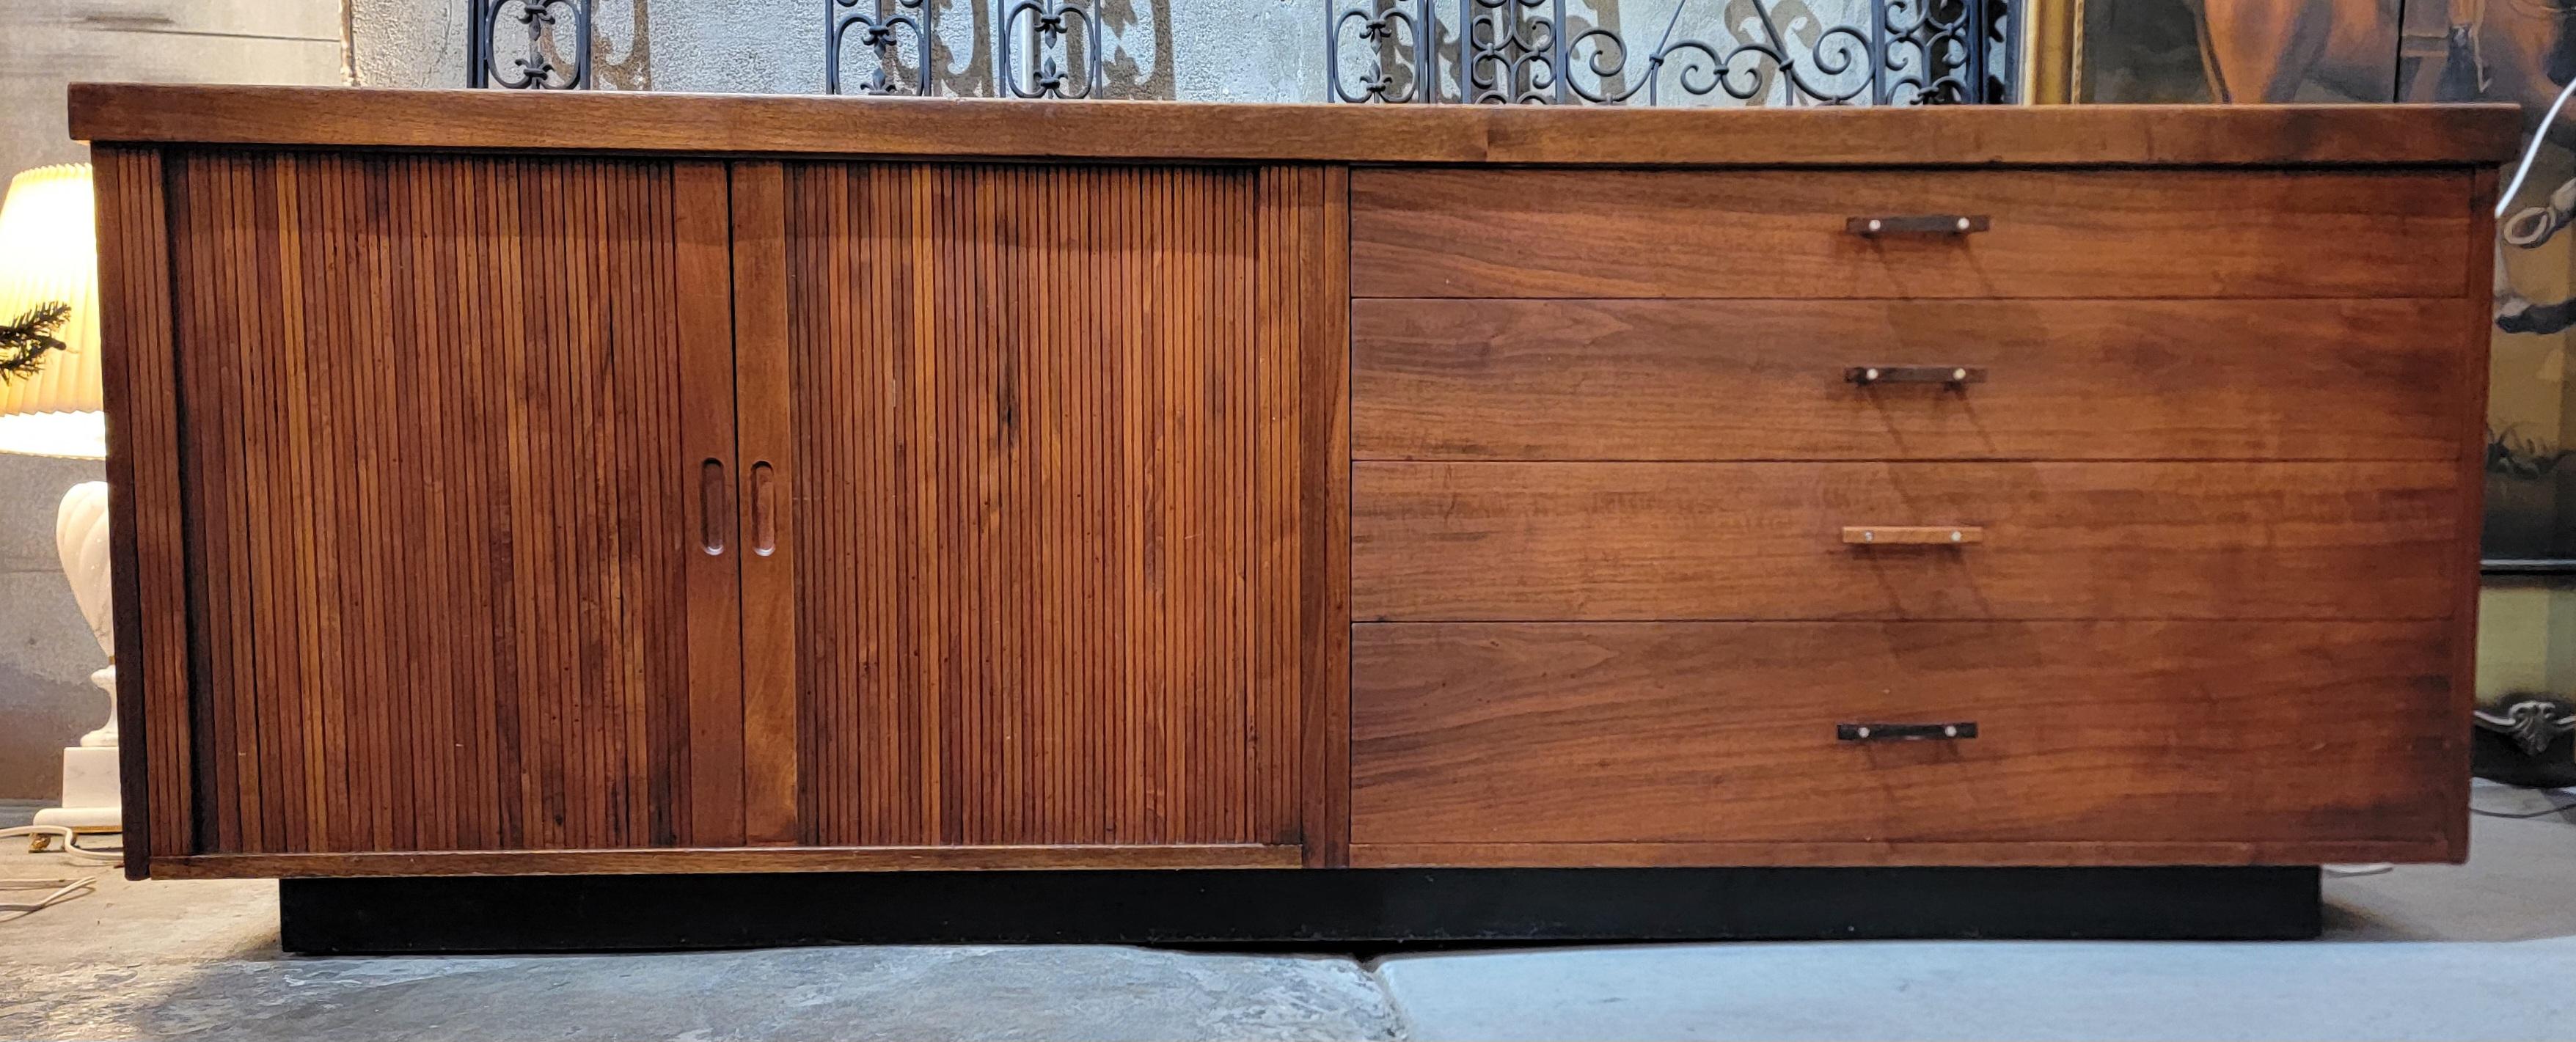 American Tambour Door Credenza by Milo Baughman for Glenn of California For Sale